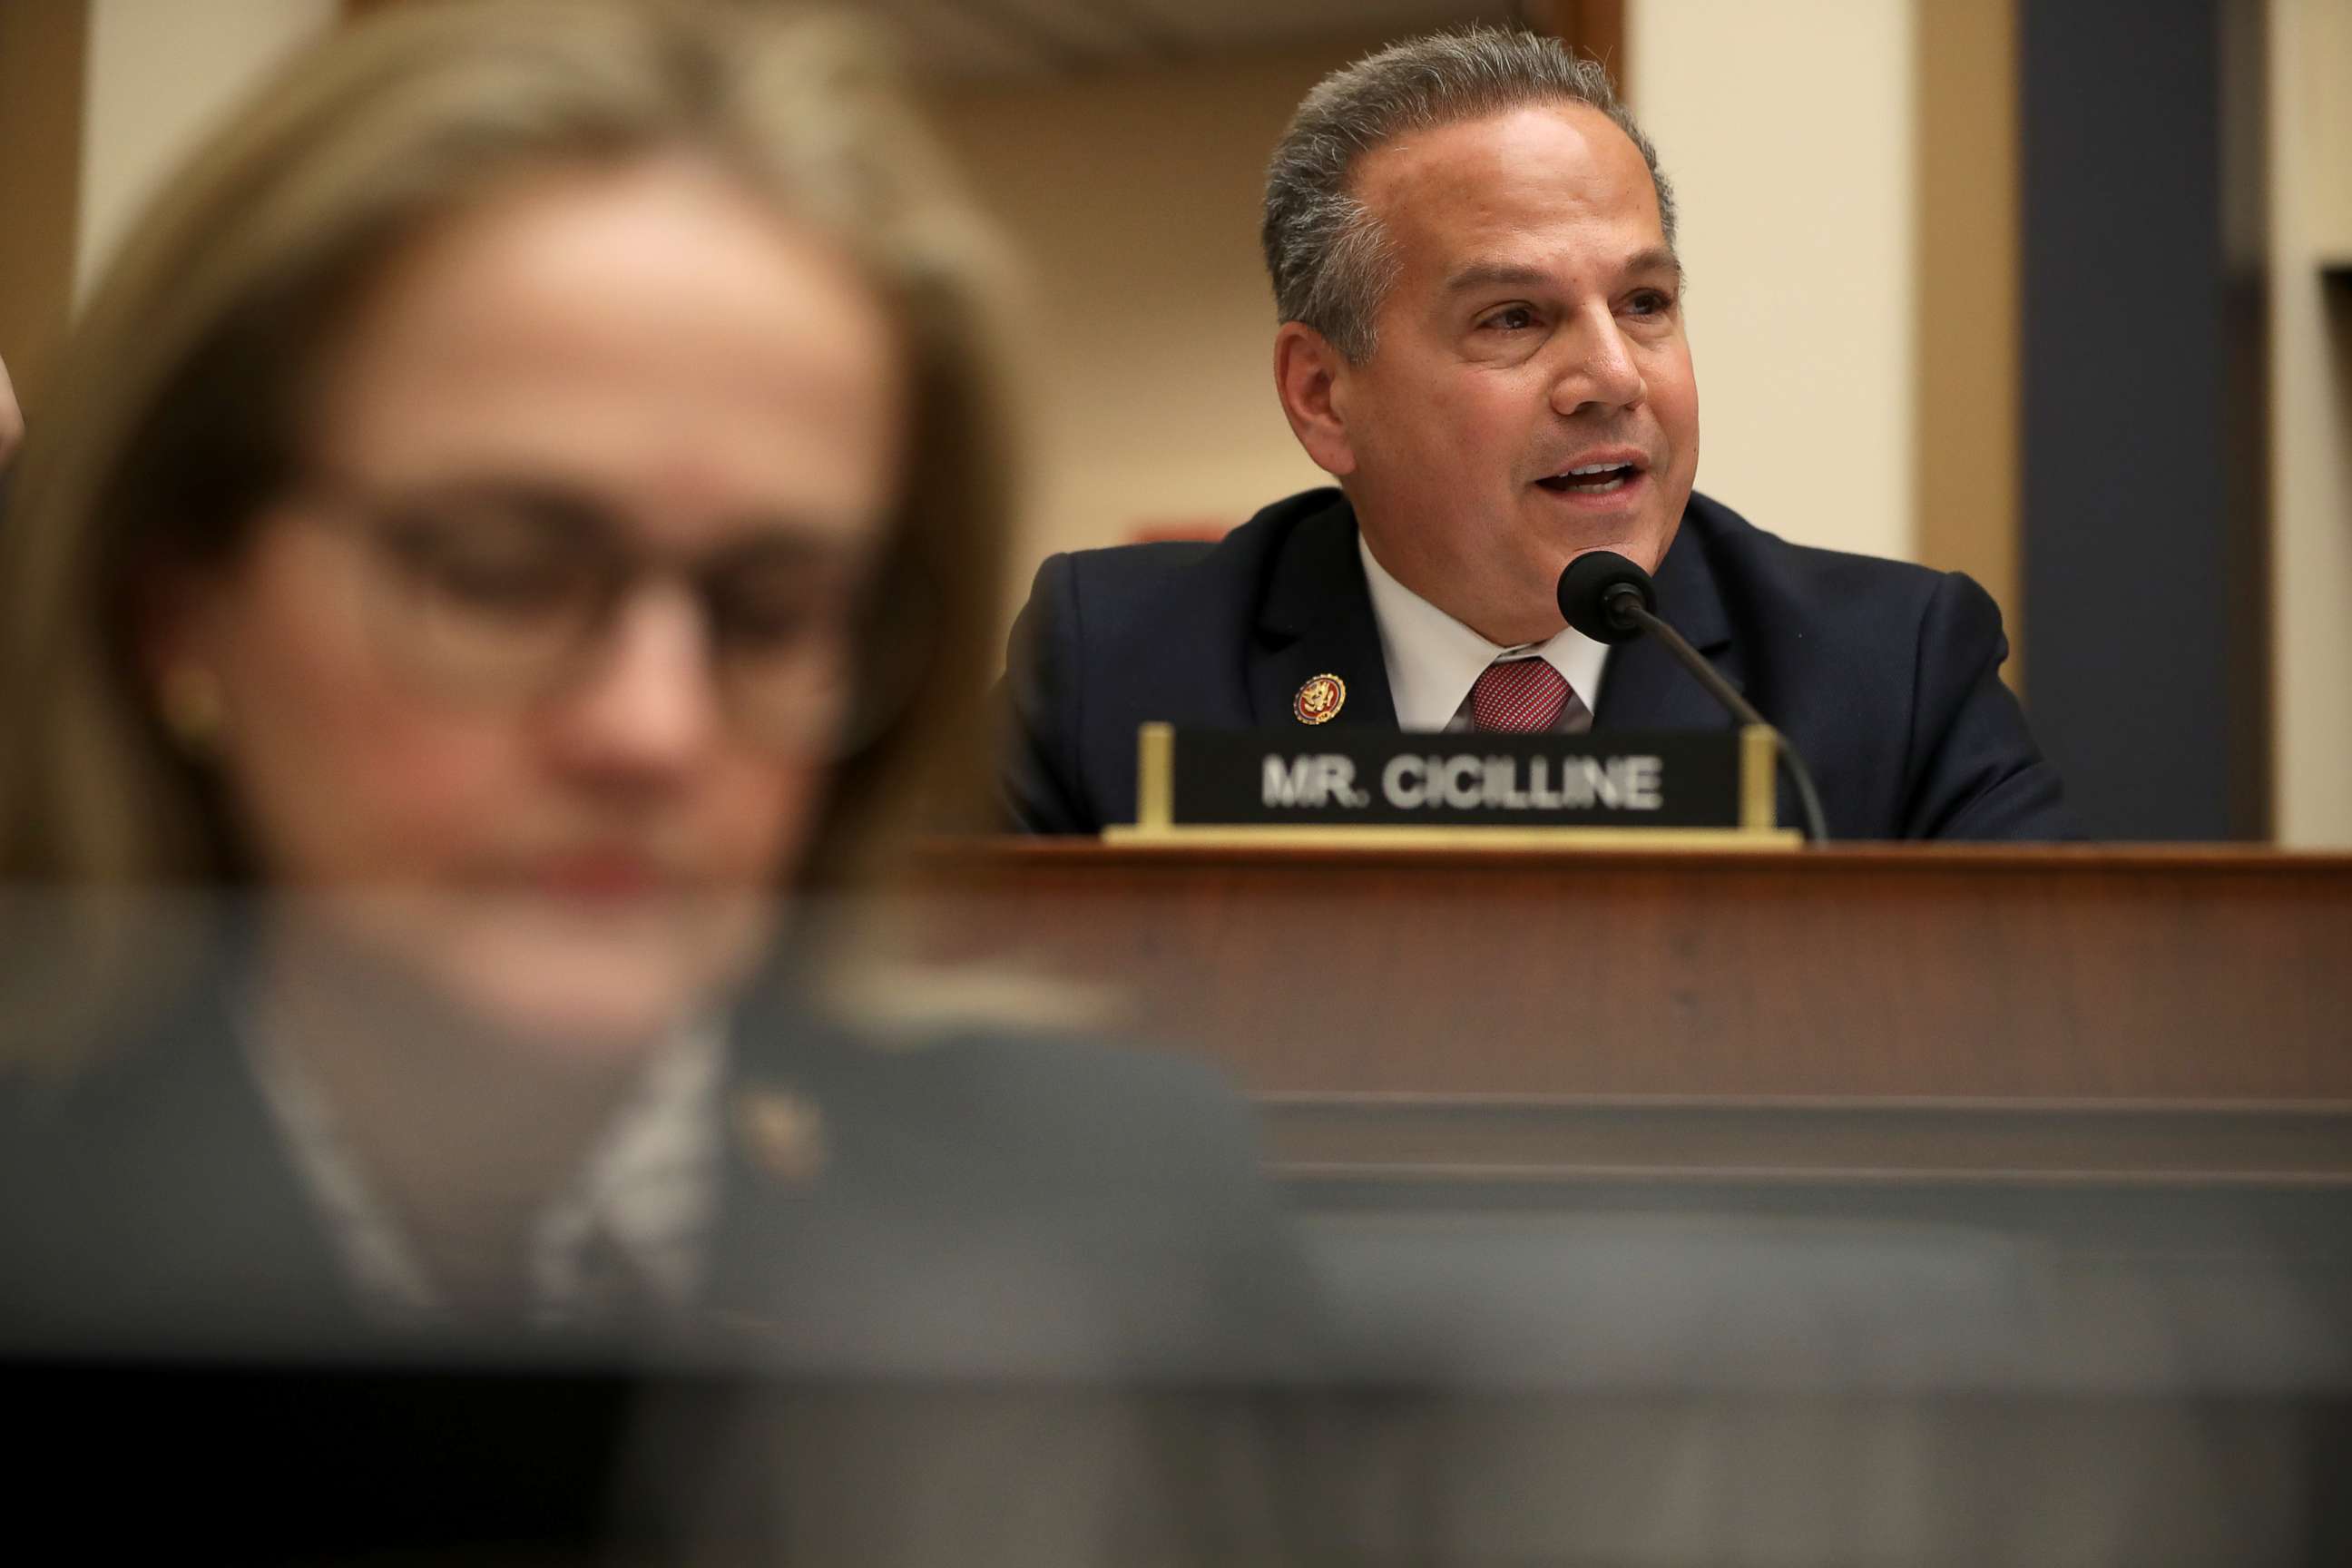 PHOTO: House Judiciary Committee member Rep. David Cicilline (D-RI) questions Acting U.S. Attorney General Matthew Whitaker during an oversight hearing in the Rayburn House Office Building on Capitol Hill, February 8, 2019.